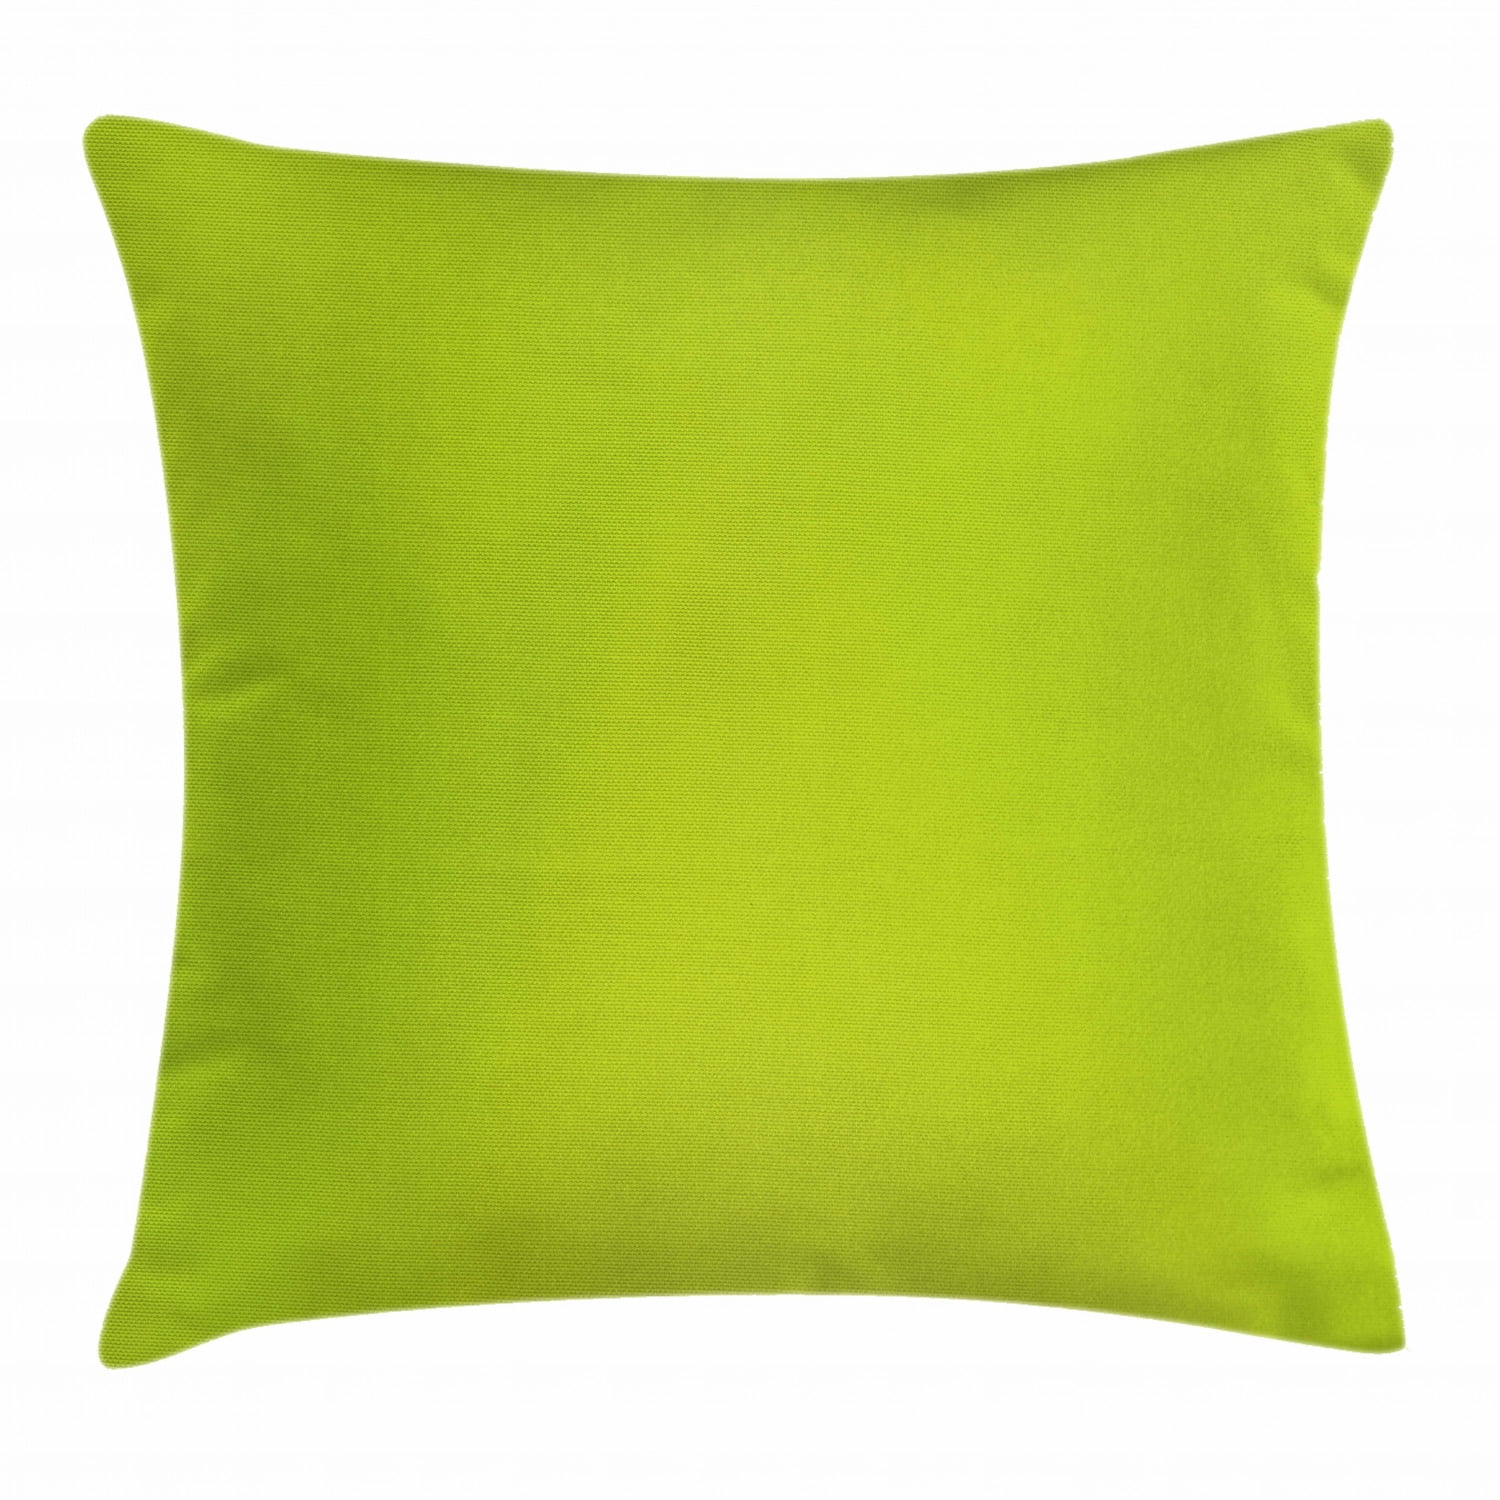 Lime Green Couch Pillows - img-palmtree